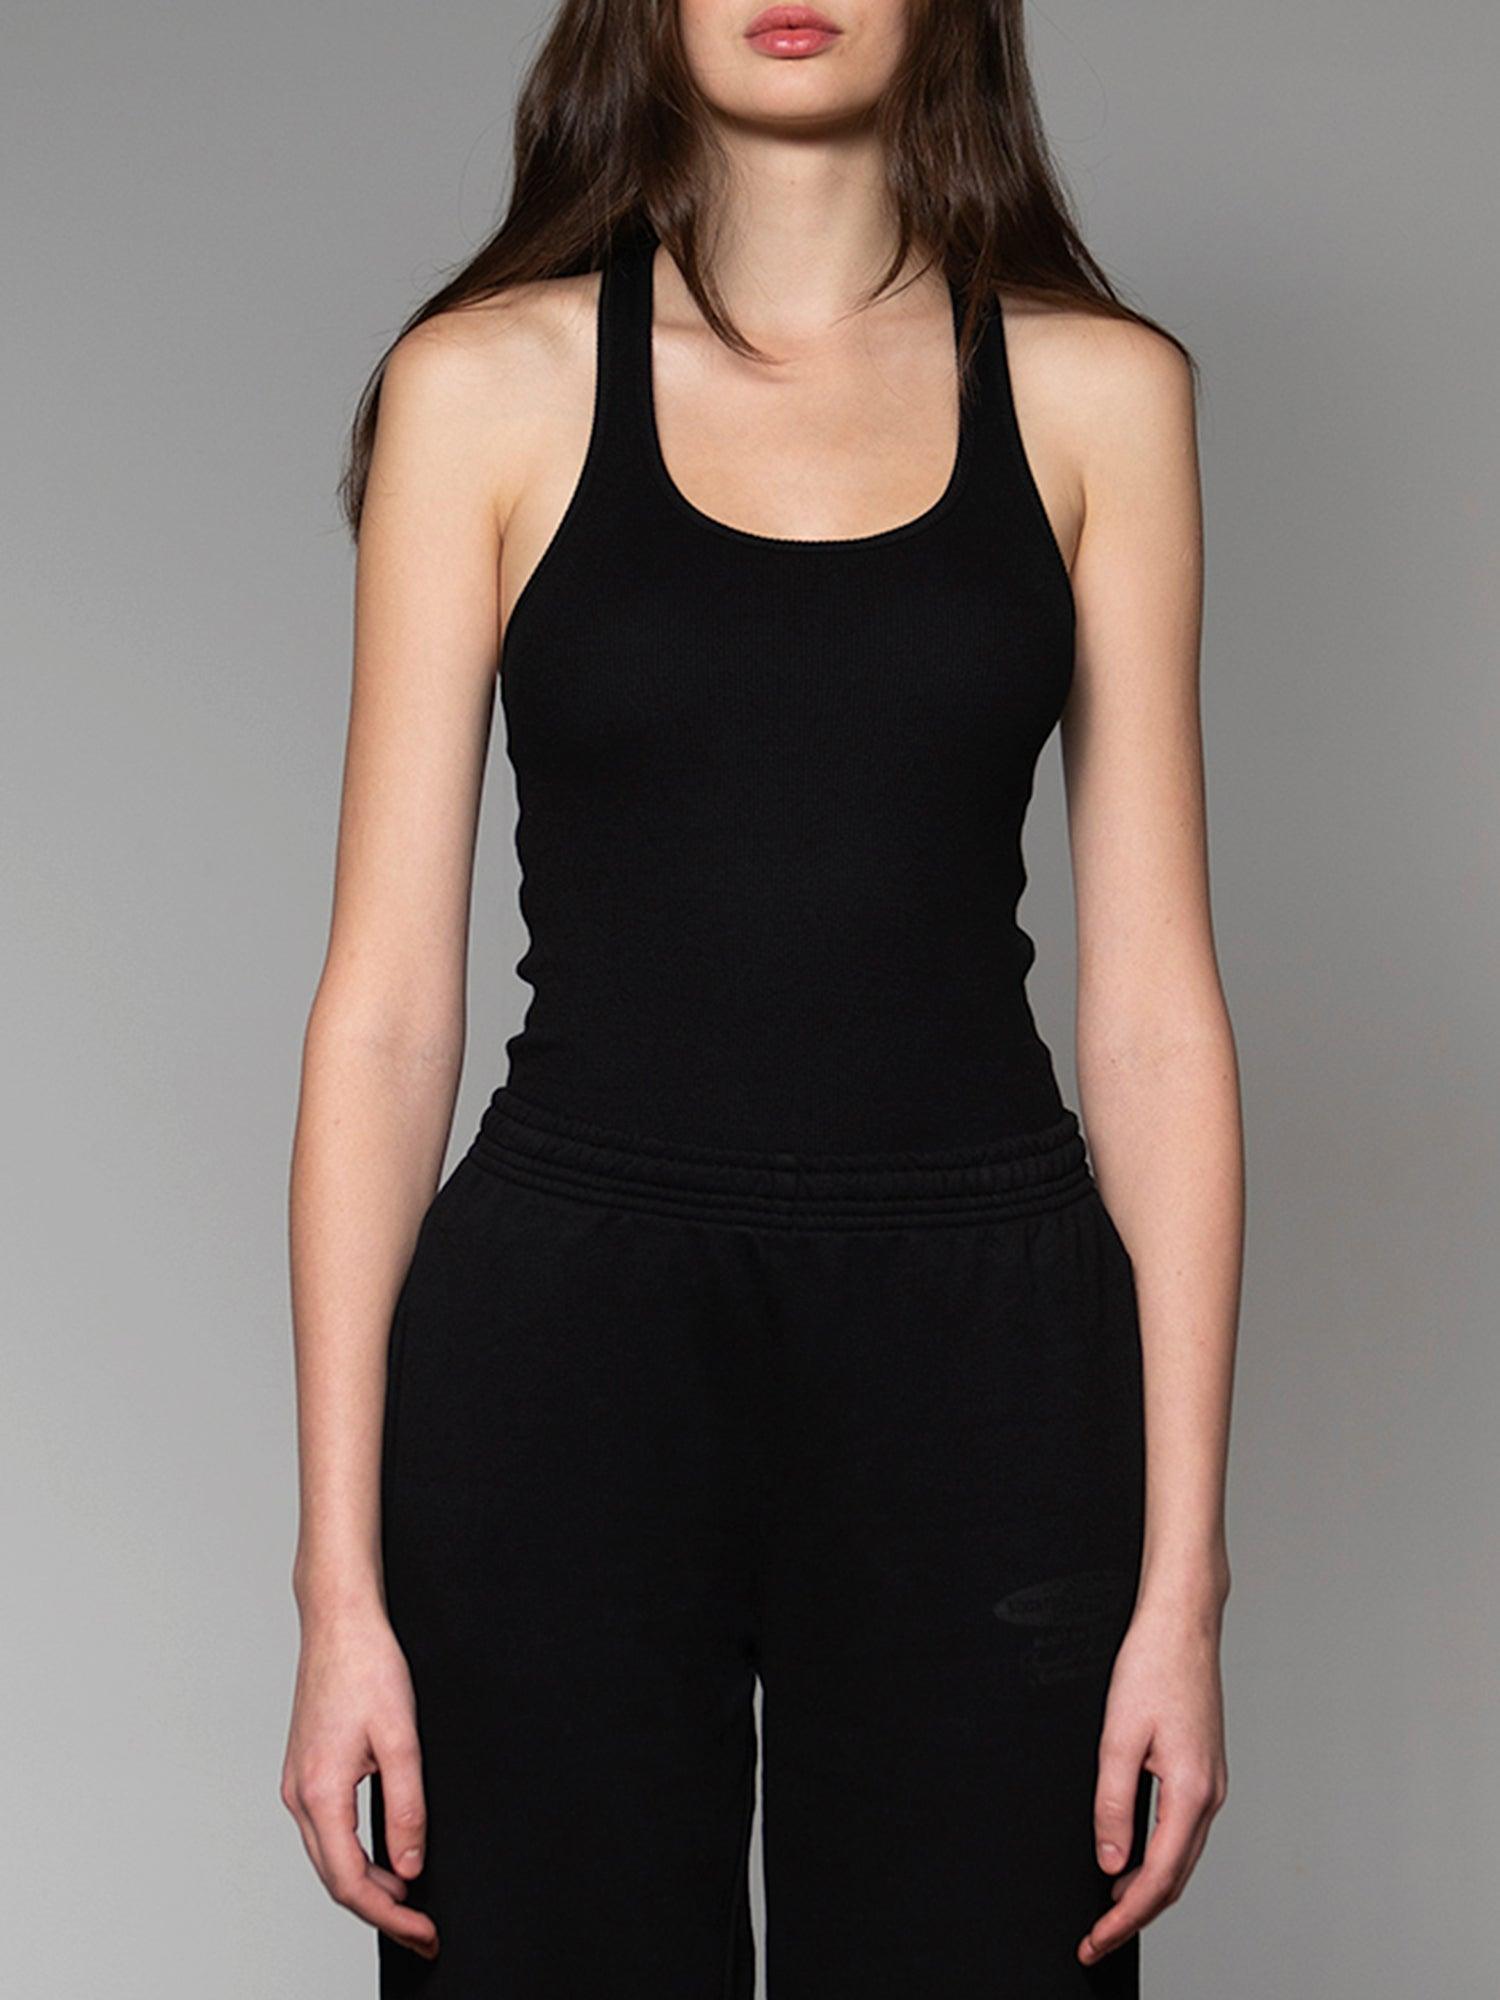 Black on Black Ribbed Tank Top No:2 - SOON TO BE ANNOUNCED